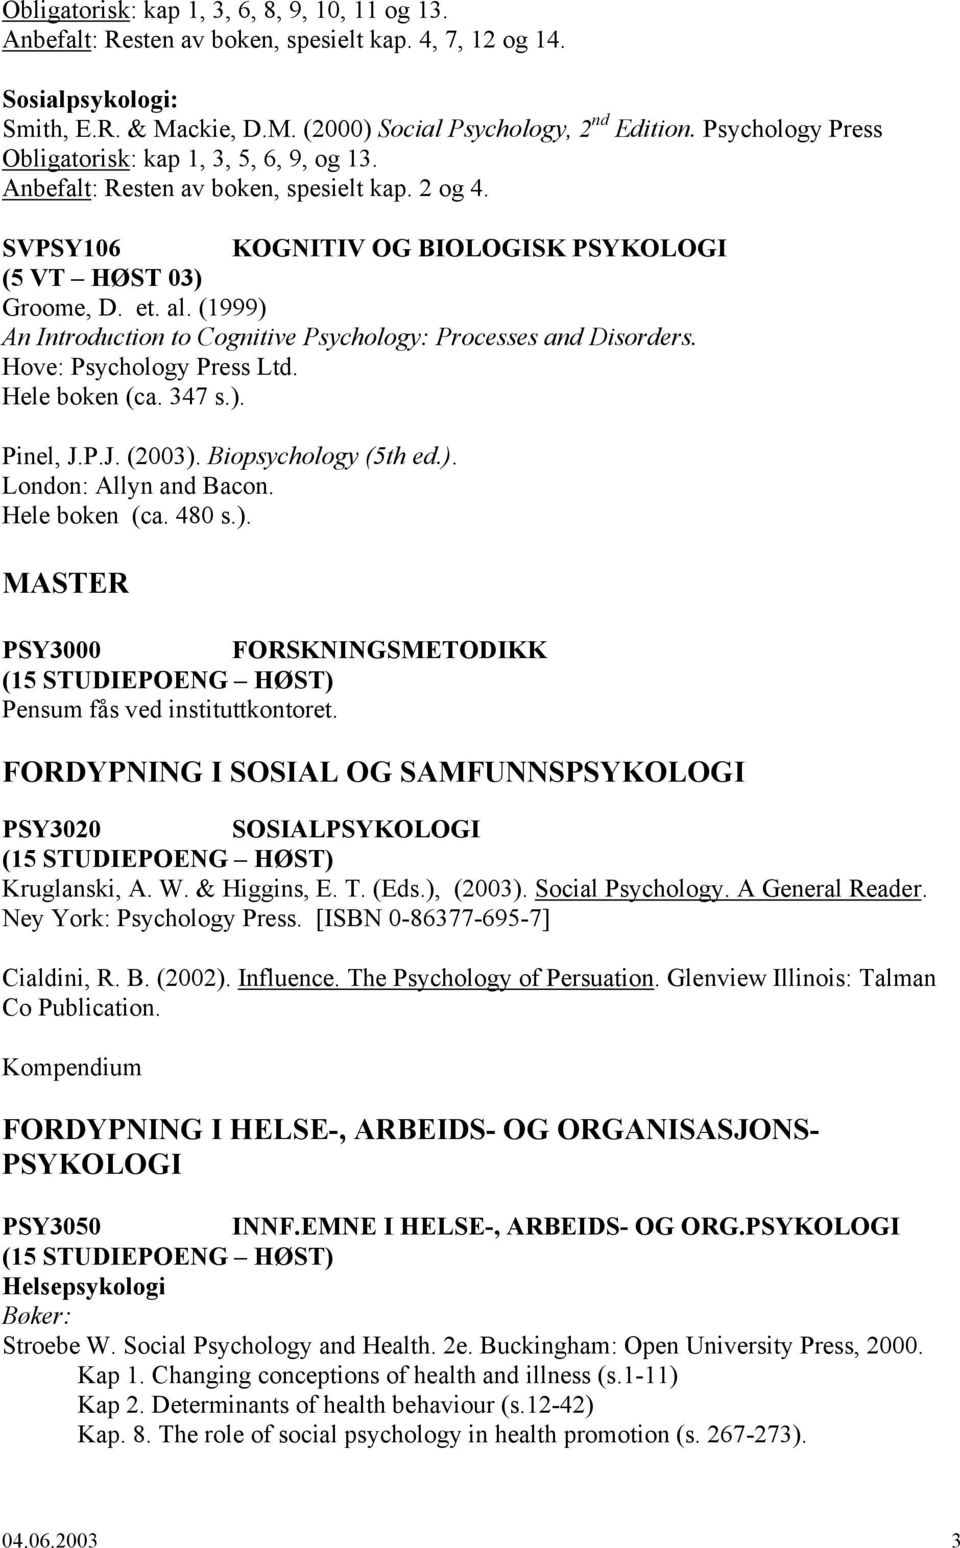 (1999) An Introduction to Cognitive Psychology: Processes and Disorders. Hove: Psychology Press Ltd. Hele boken (ca. 347 s.). Pinel, J.P.J. (2003). Biopsychology (5th ed.). London: Allyn and Bacon.